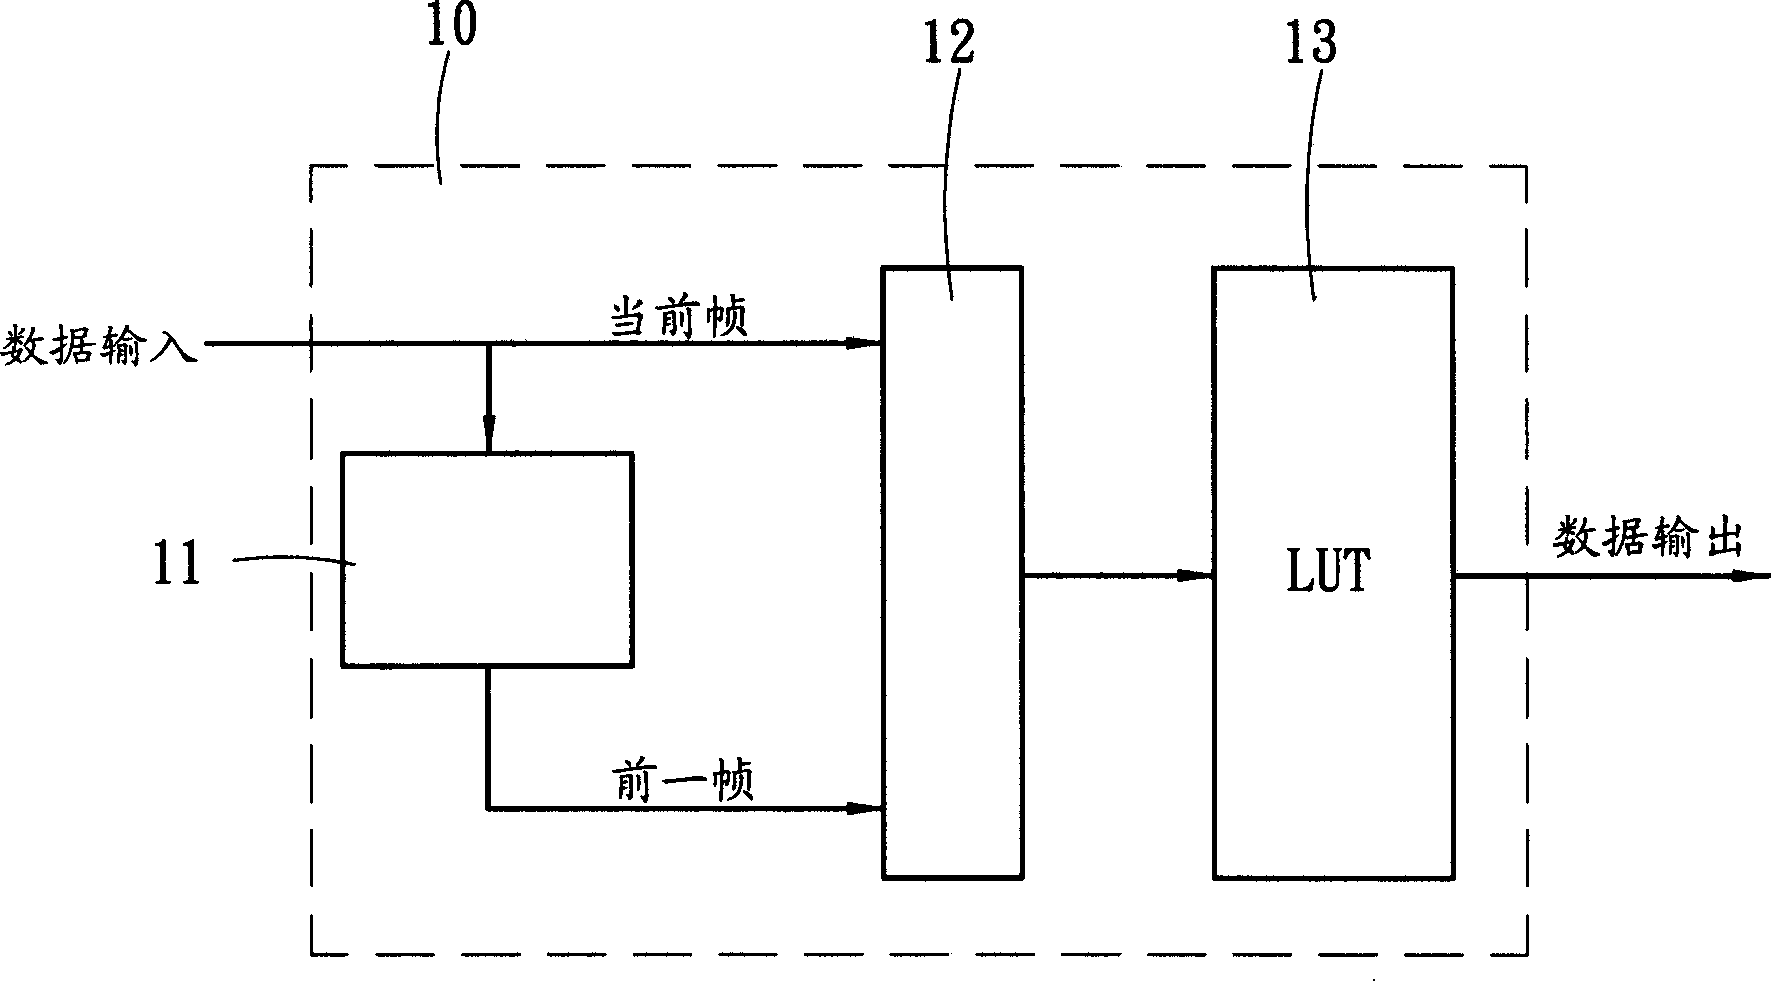 Drive method for reducing torsion type and ultra-torsion type LCD device reaction time